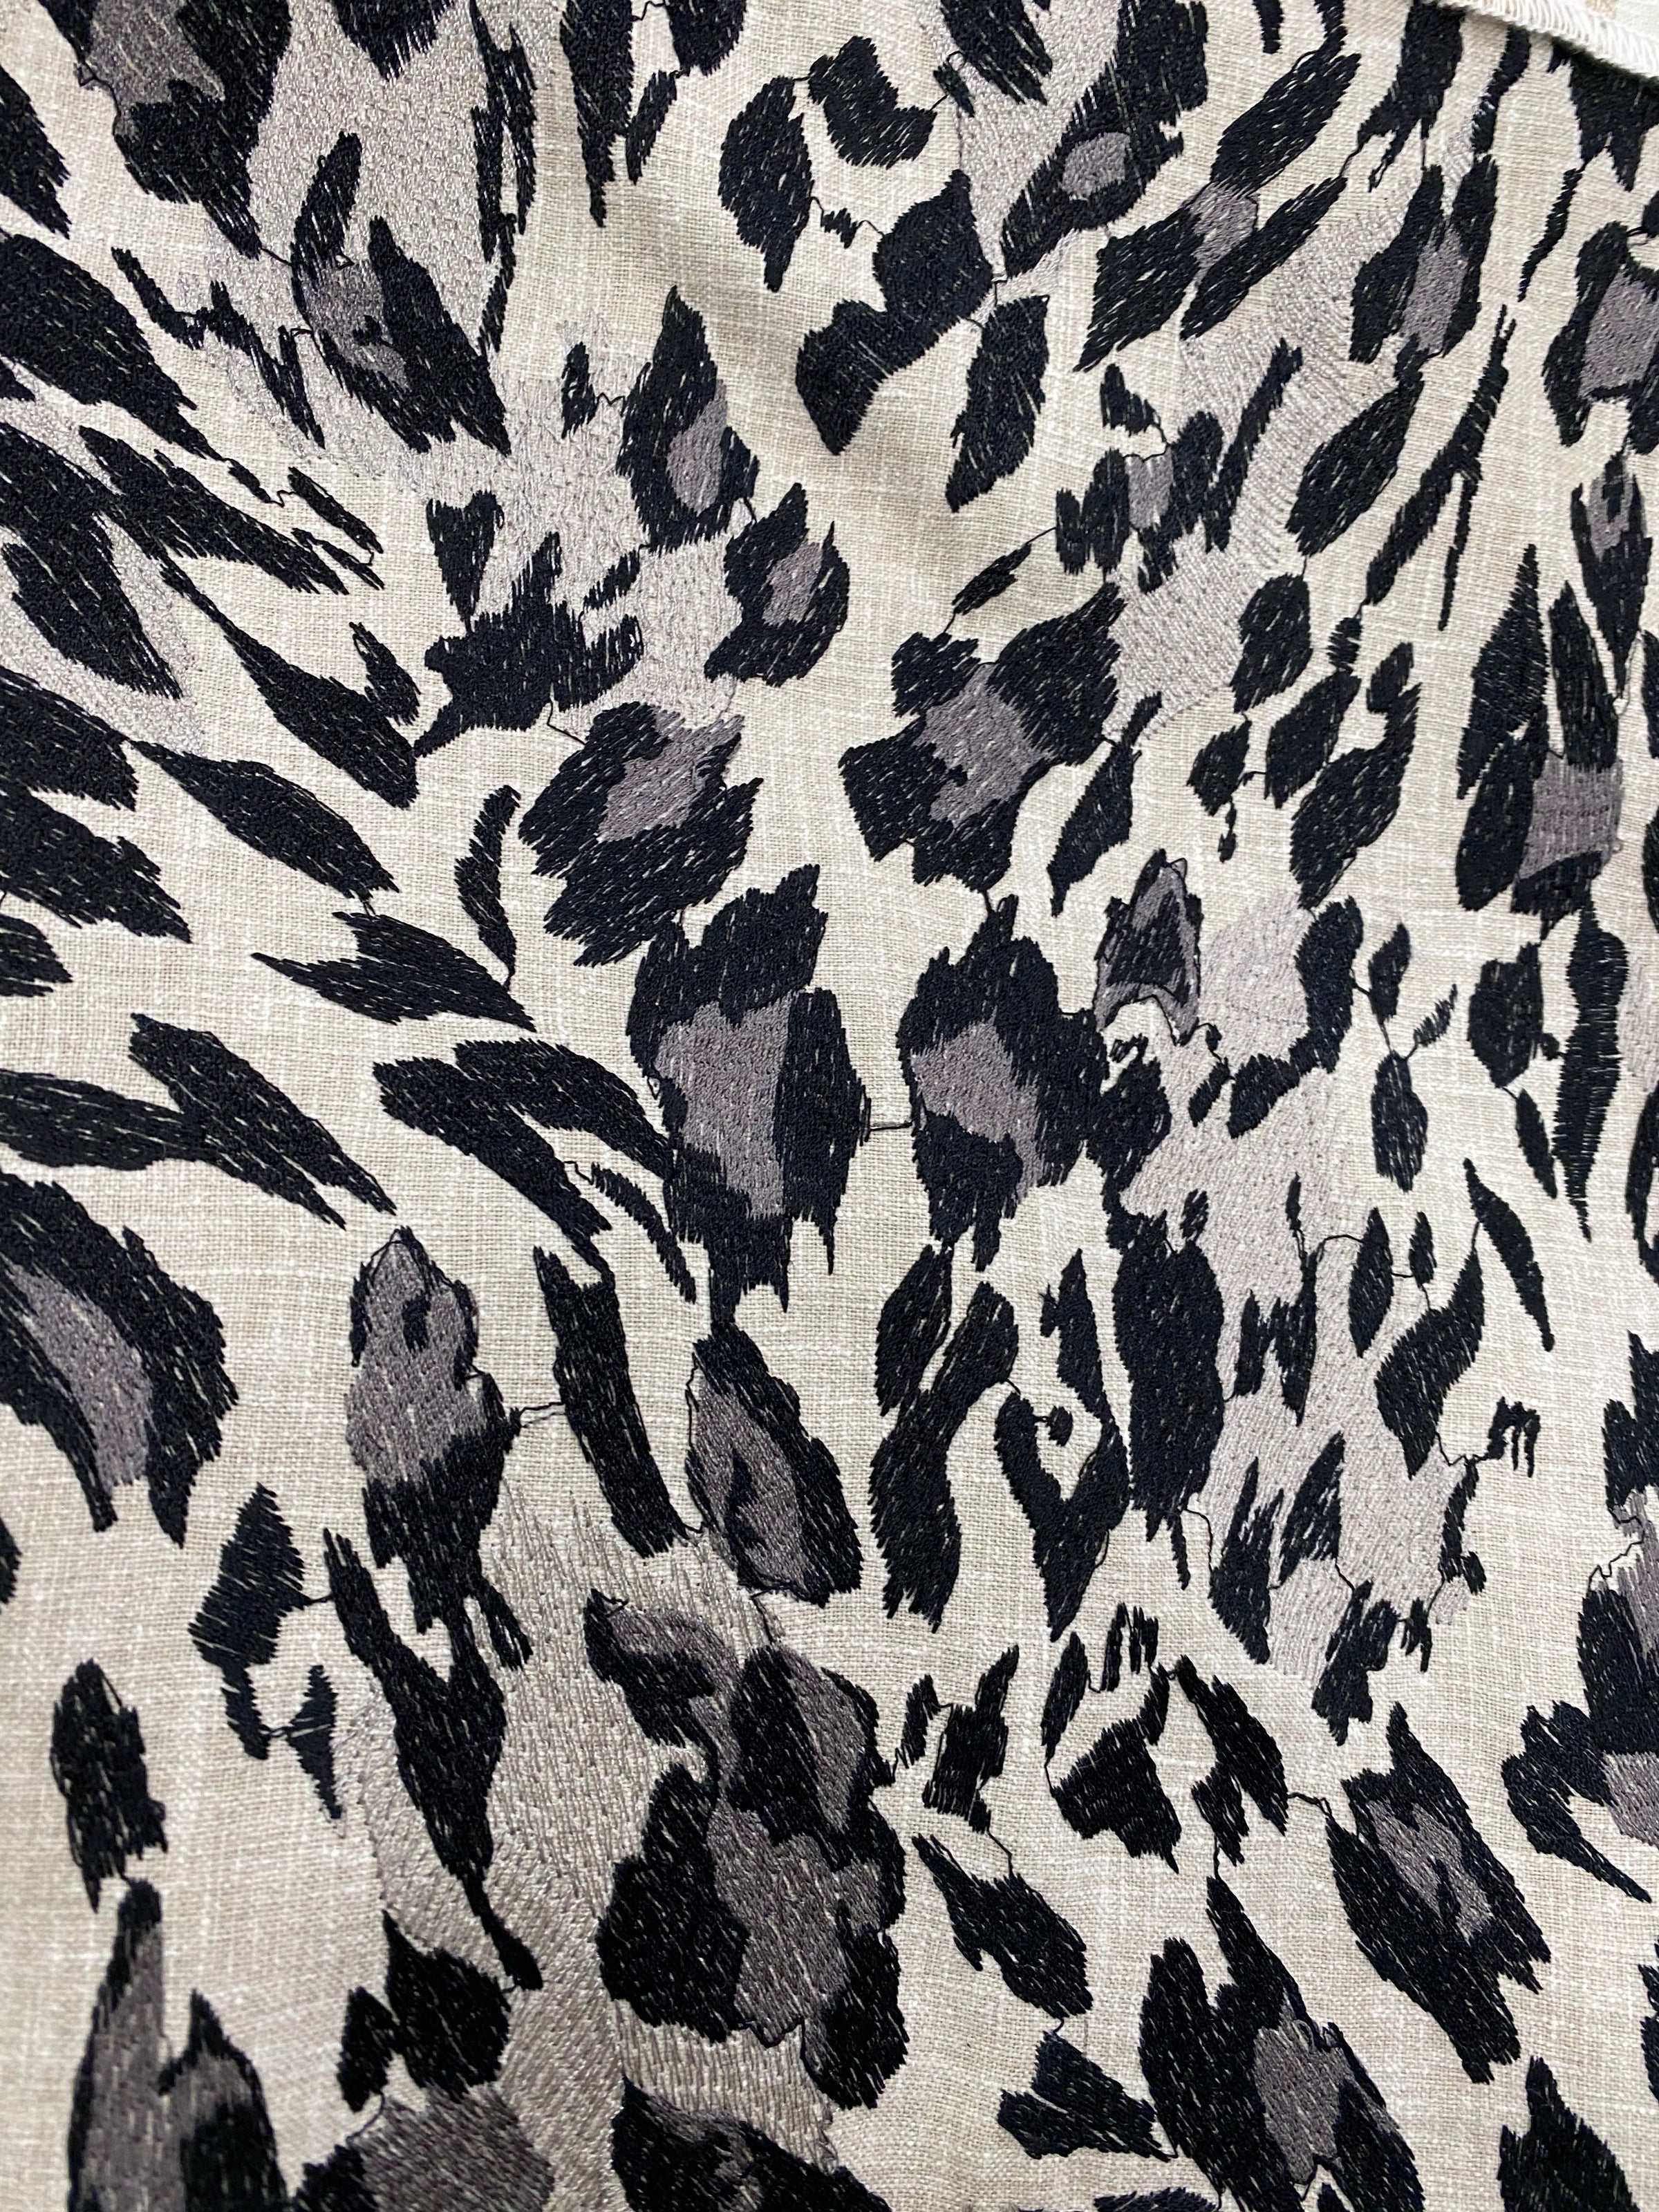 NEW Prince Stanley Novelty Embroidered Leopard Decorating Fabric in Cream,  Black, and Gray